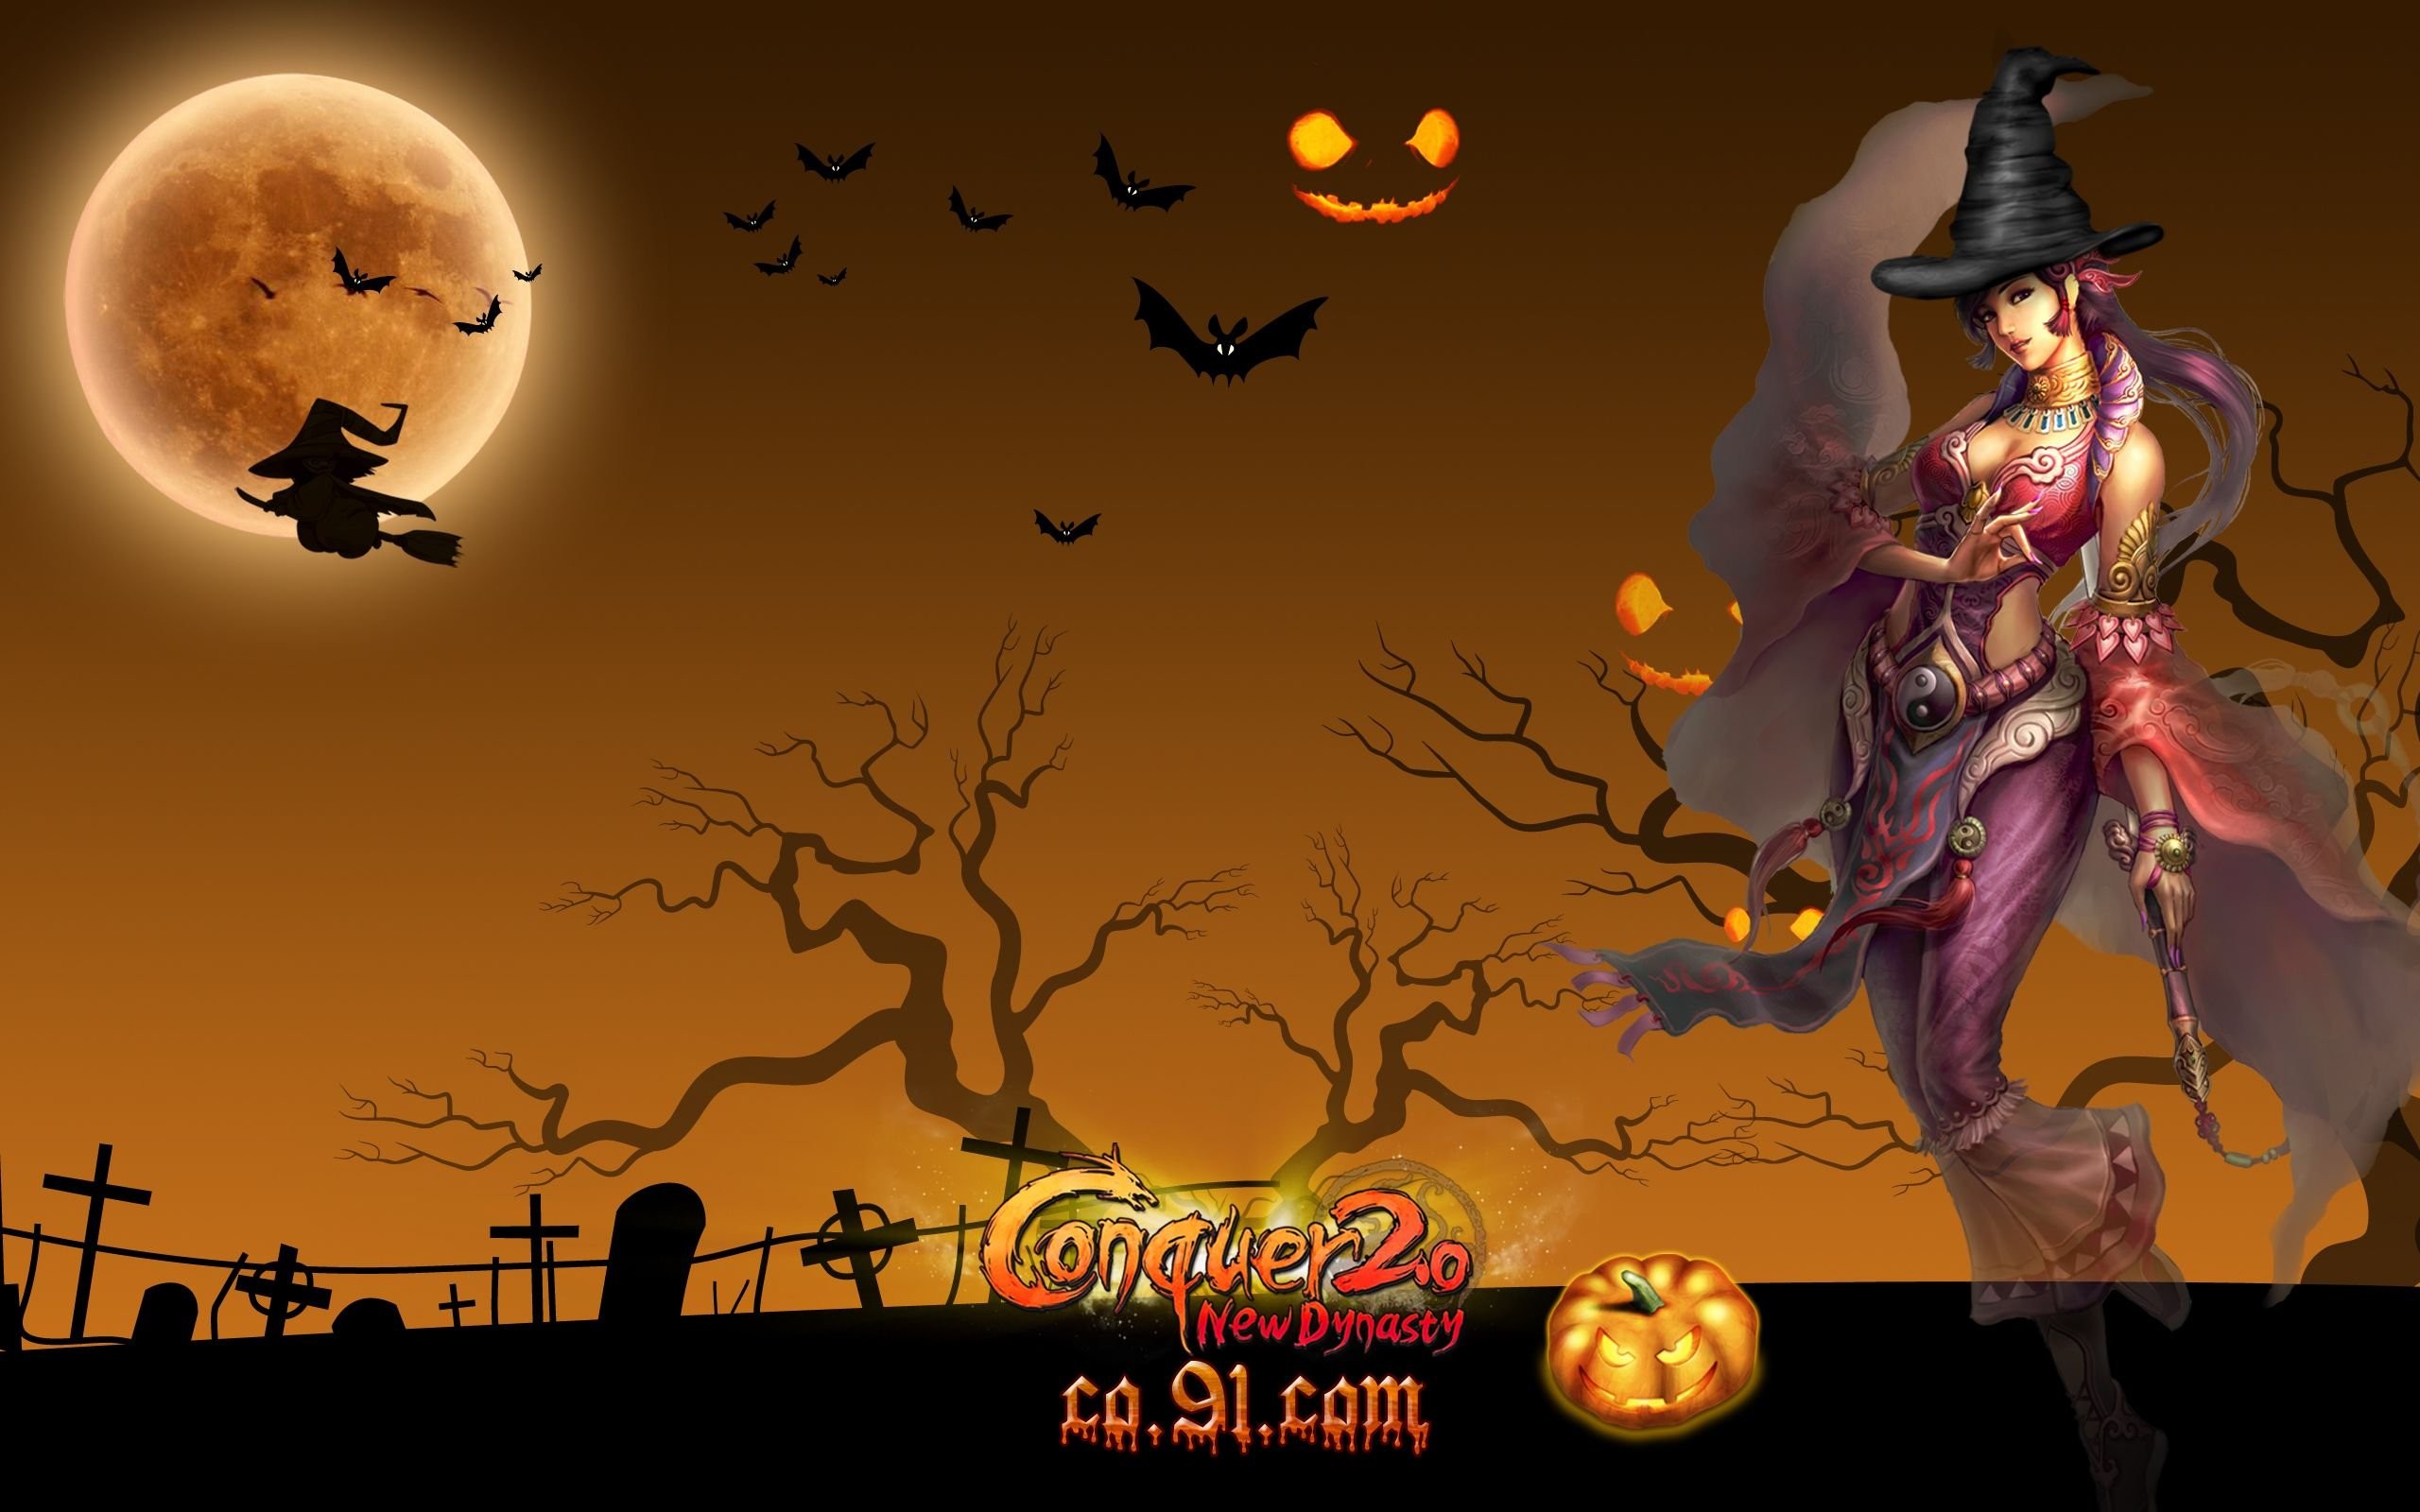 2560x1600 CONQUER ONLINE fantasy mmo rpg martial action fighting 1cono warrior poster halloween  witch wallpaper |  | 640317 | WallpaperUP